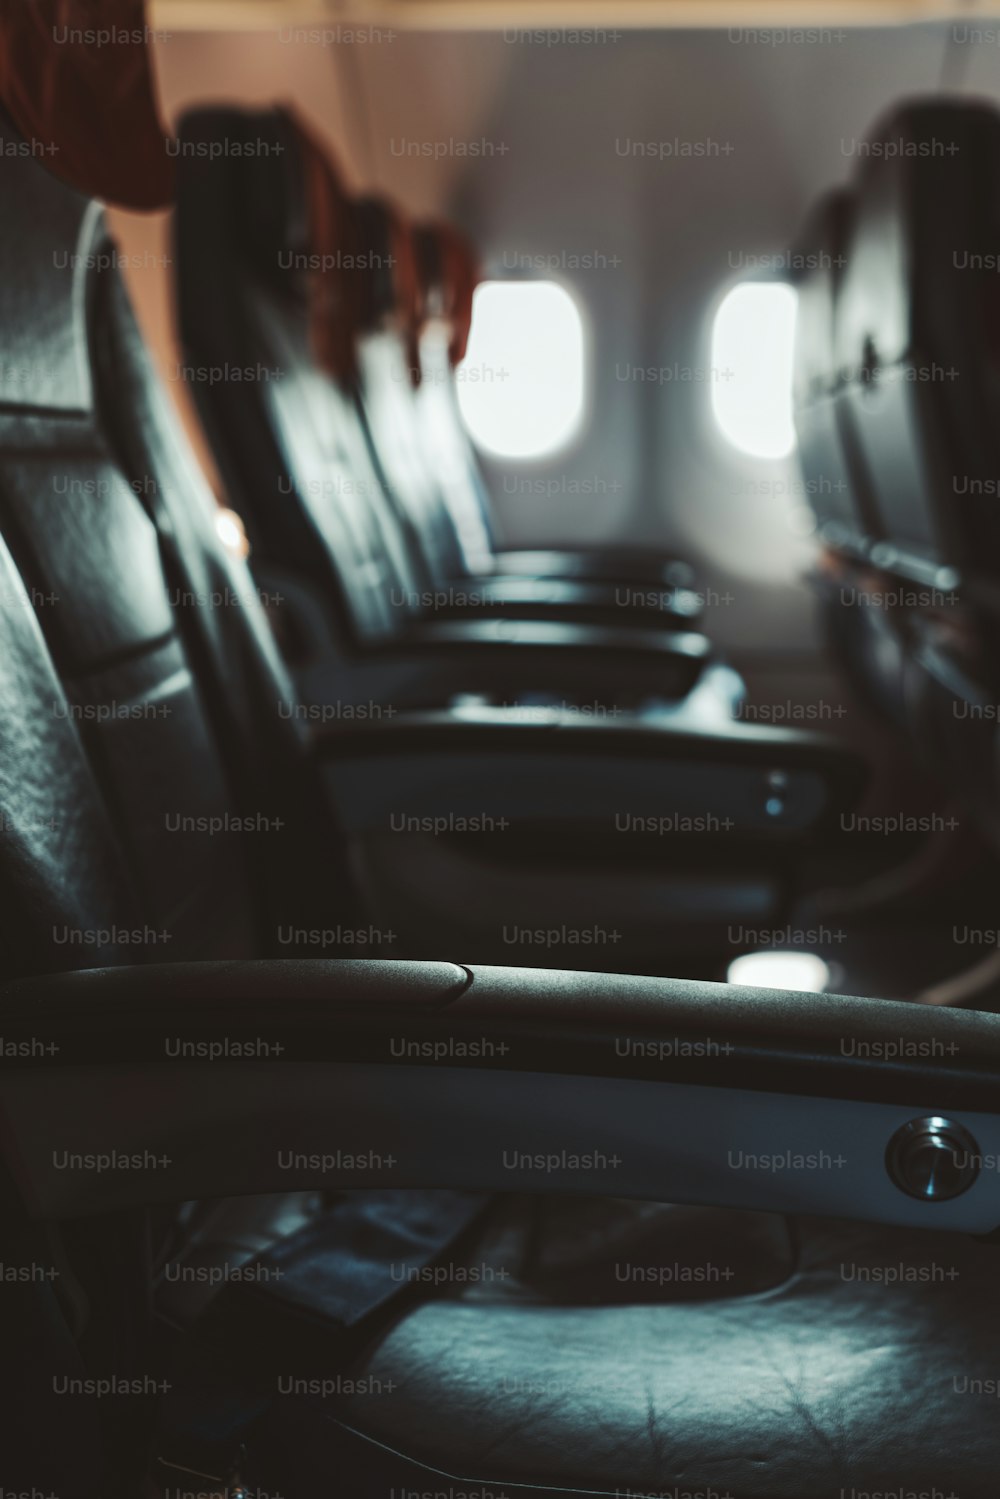 A dark aircraft interior in economy class: the row of modern empty leather seats with armrests down, shallow depth of field, selective focus on the elbow rest in the foreground, rag mat under the head